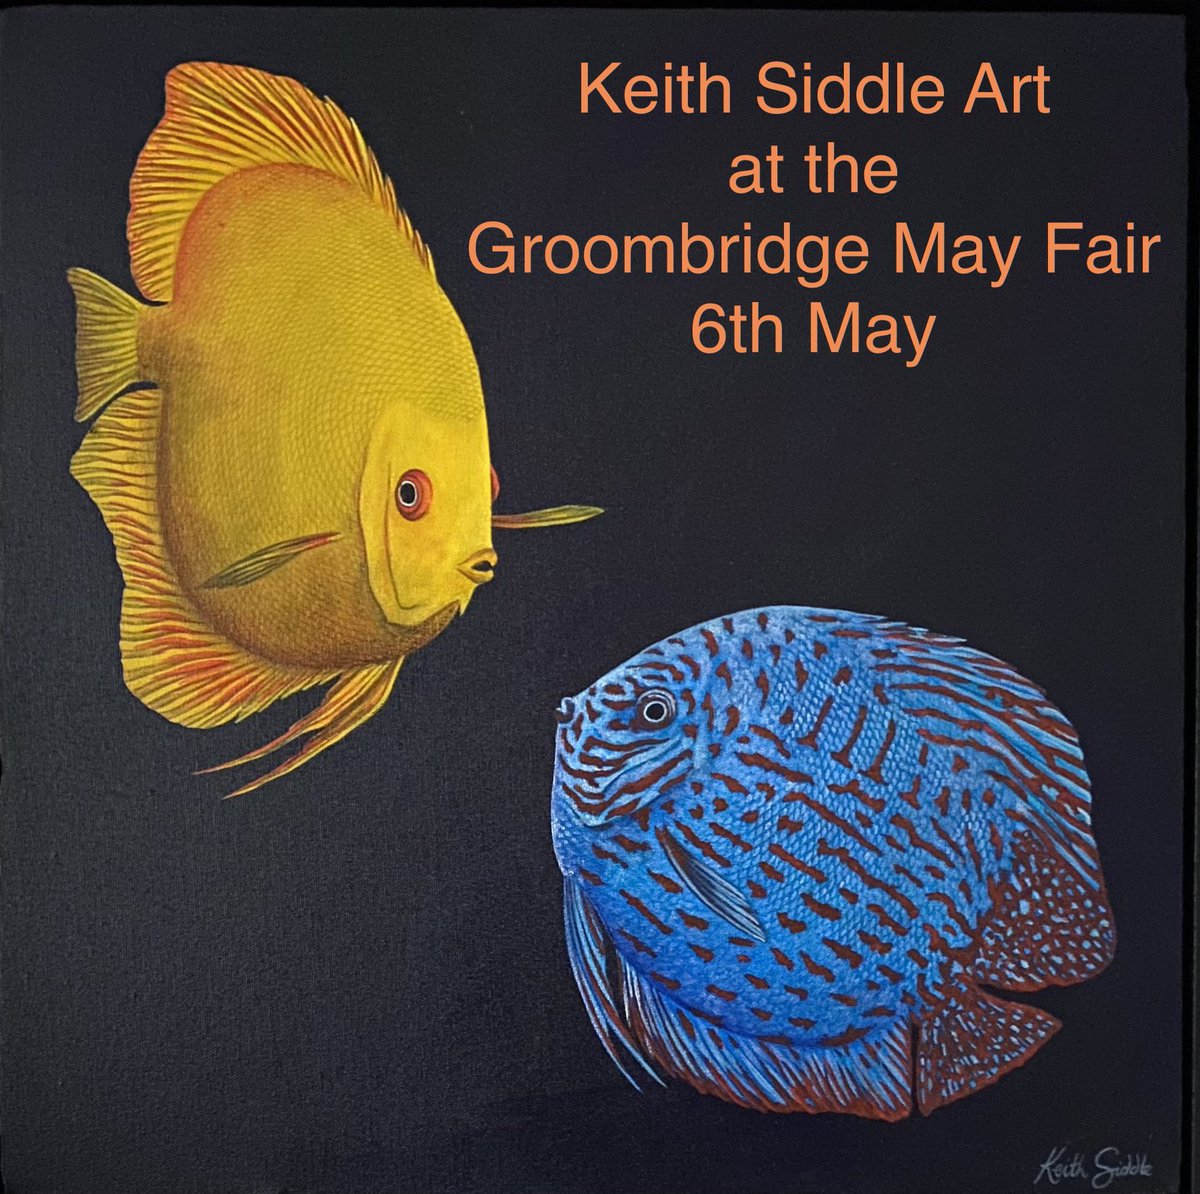 Pop along to the @groombridge May Day Fair on Monday 6th May. I will have a gazebo full of my art and books. #discus #discusfish #discuspaintings #groombridge #seopenstudios #langtongreen #tunbridgewells